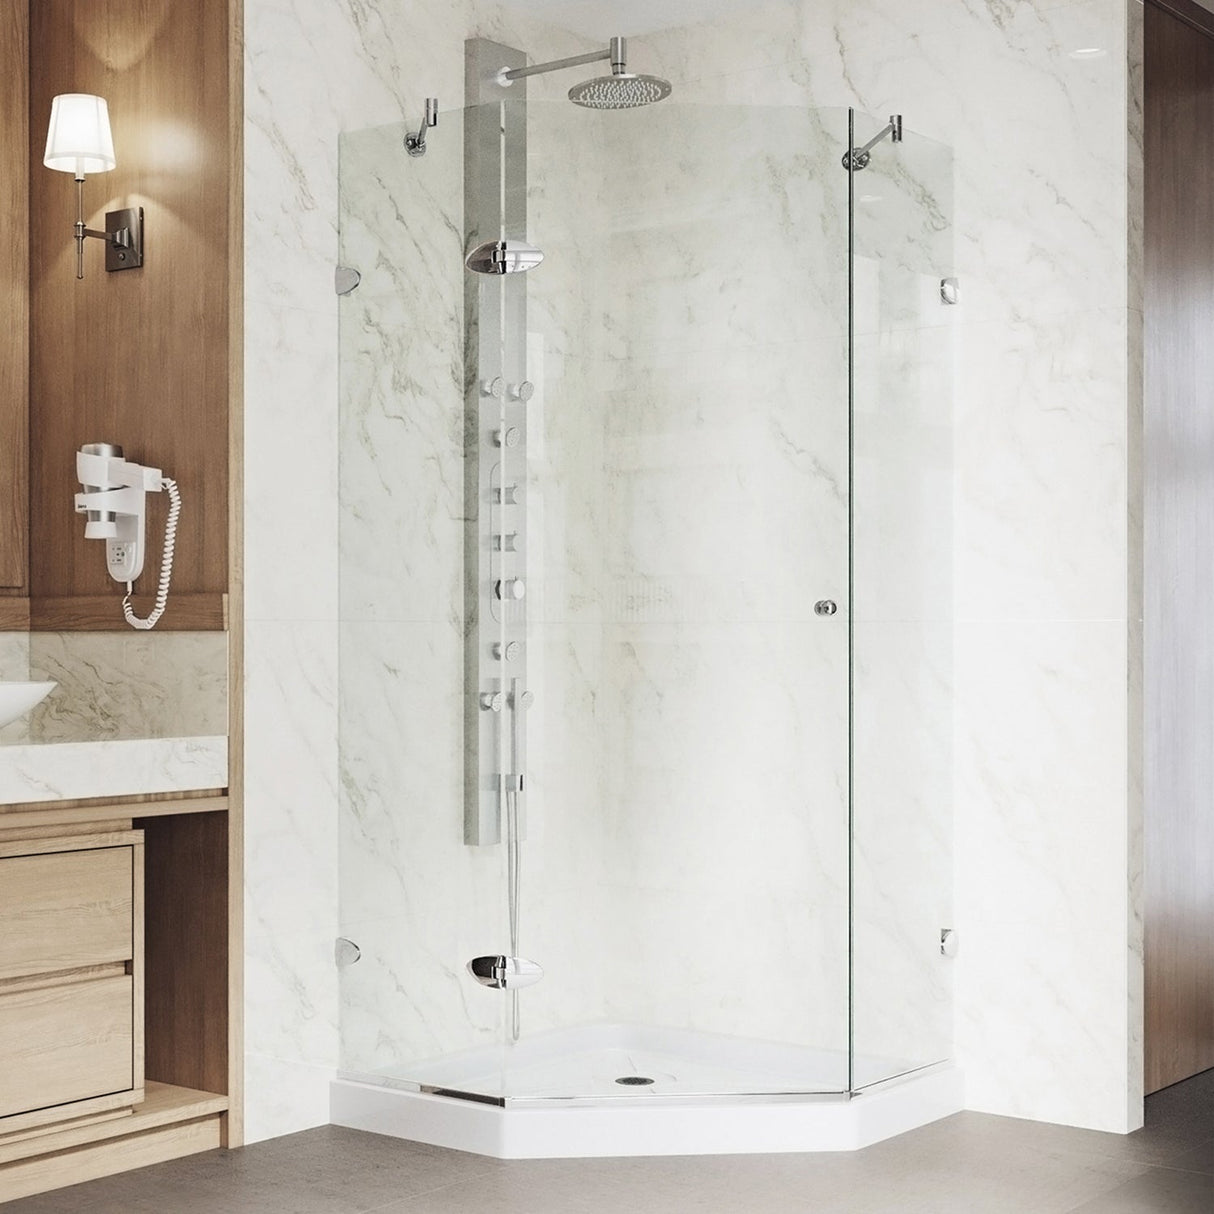 VIGO Verona 36.125 W x 70.375 H Frameless Hinged Shower Enclosure in Chrome with shower base and handle VG6061CHCL36WS